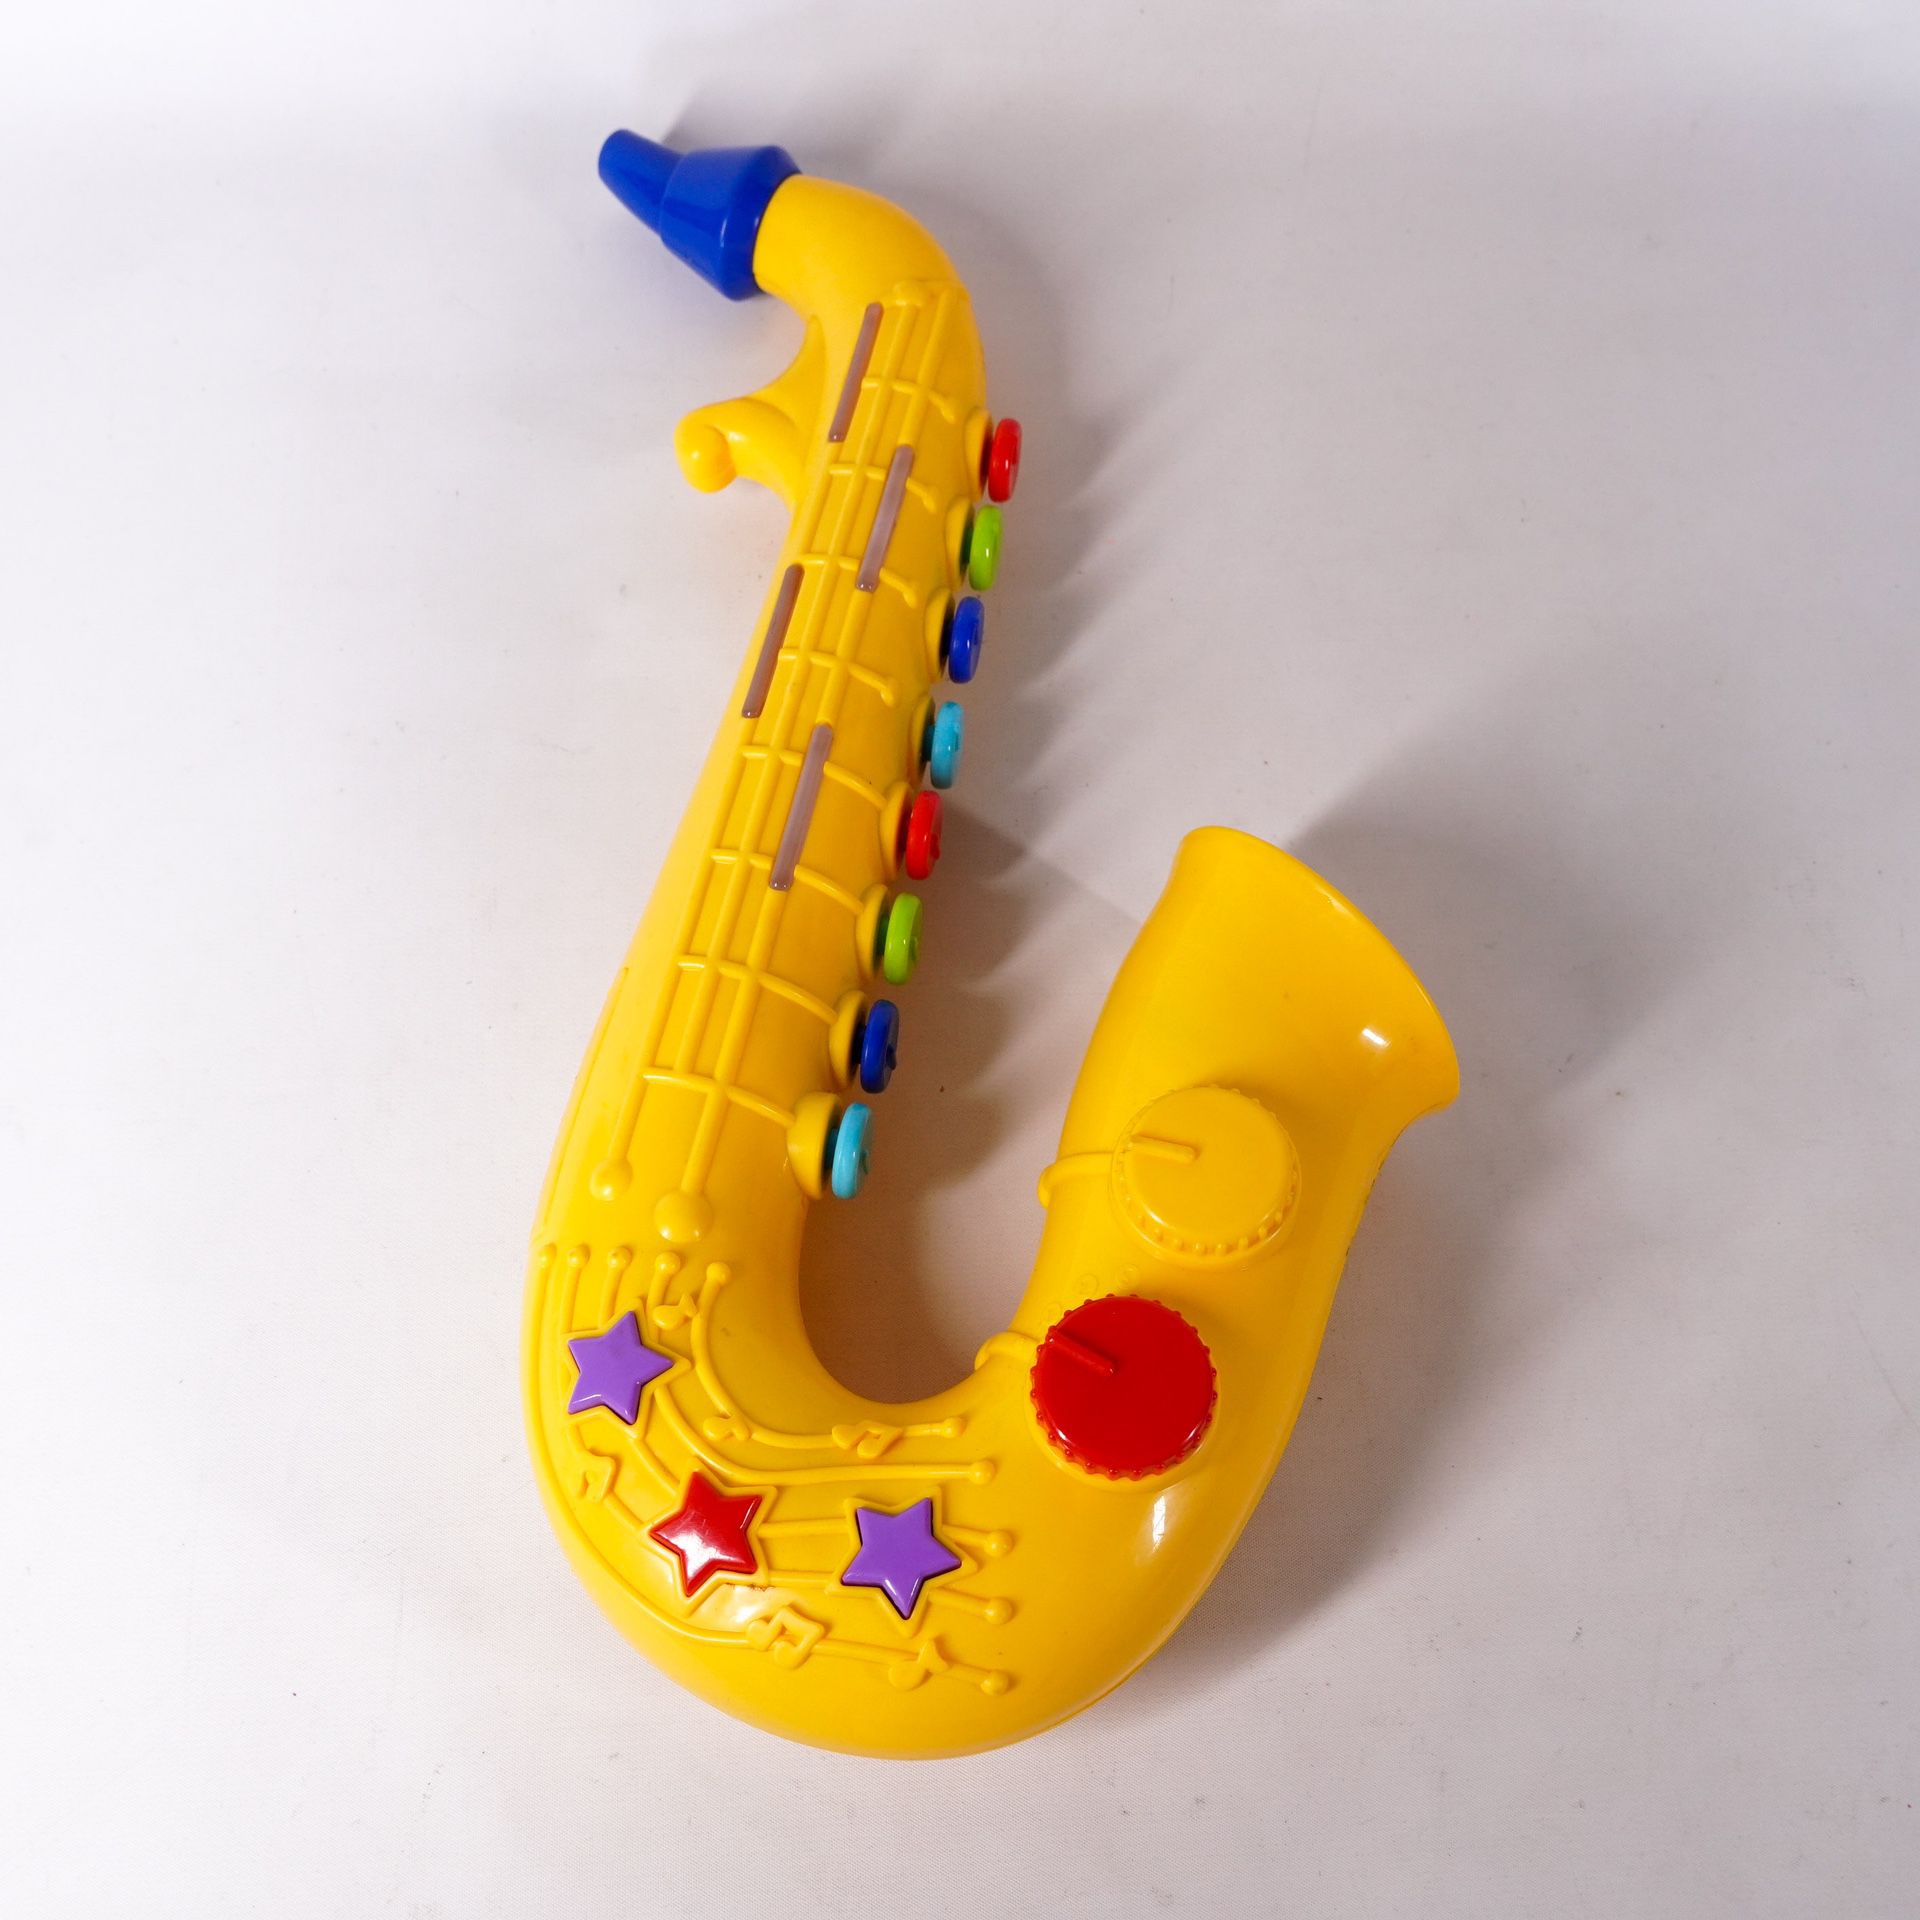 15.5" Winfun Electronic Saxophone Toy Yellow Winfat Industrial *Untested*